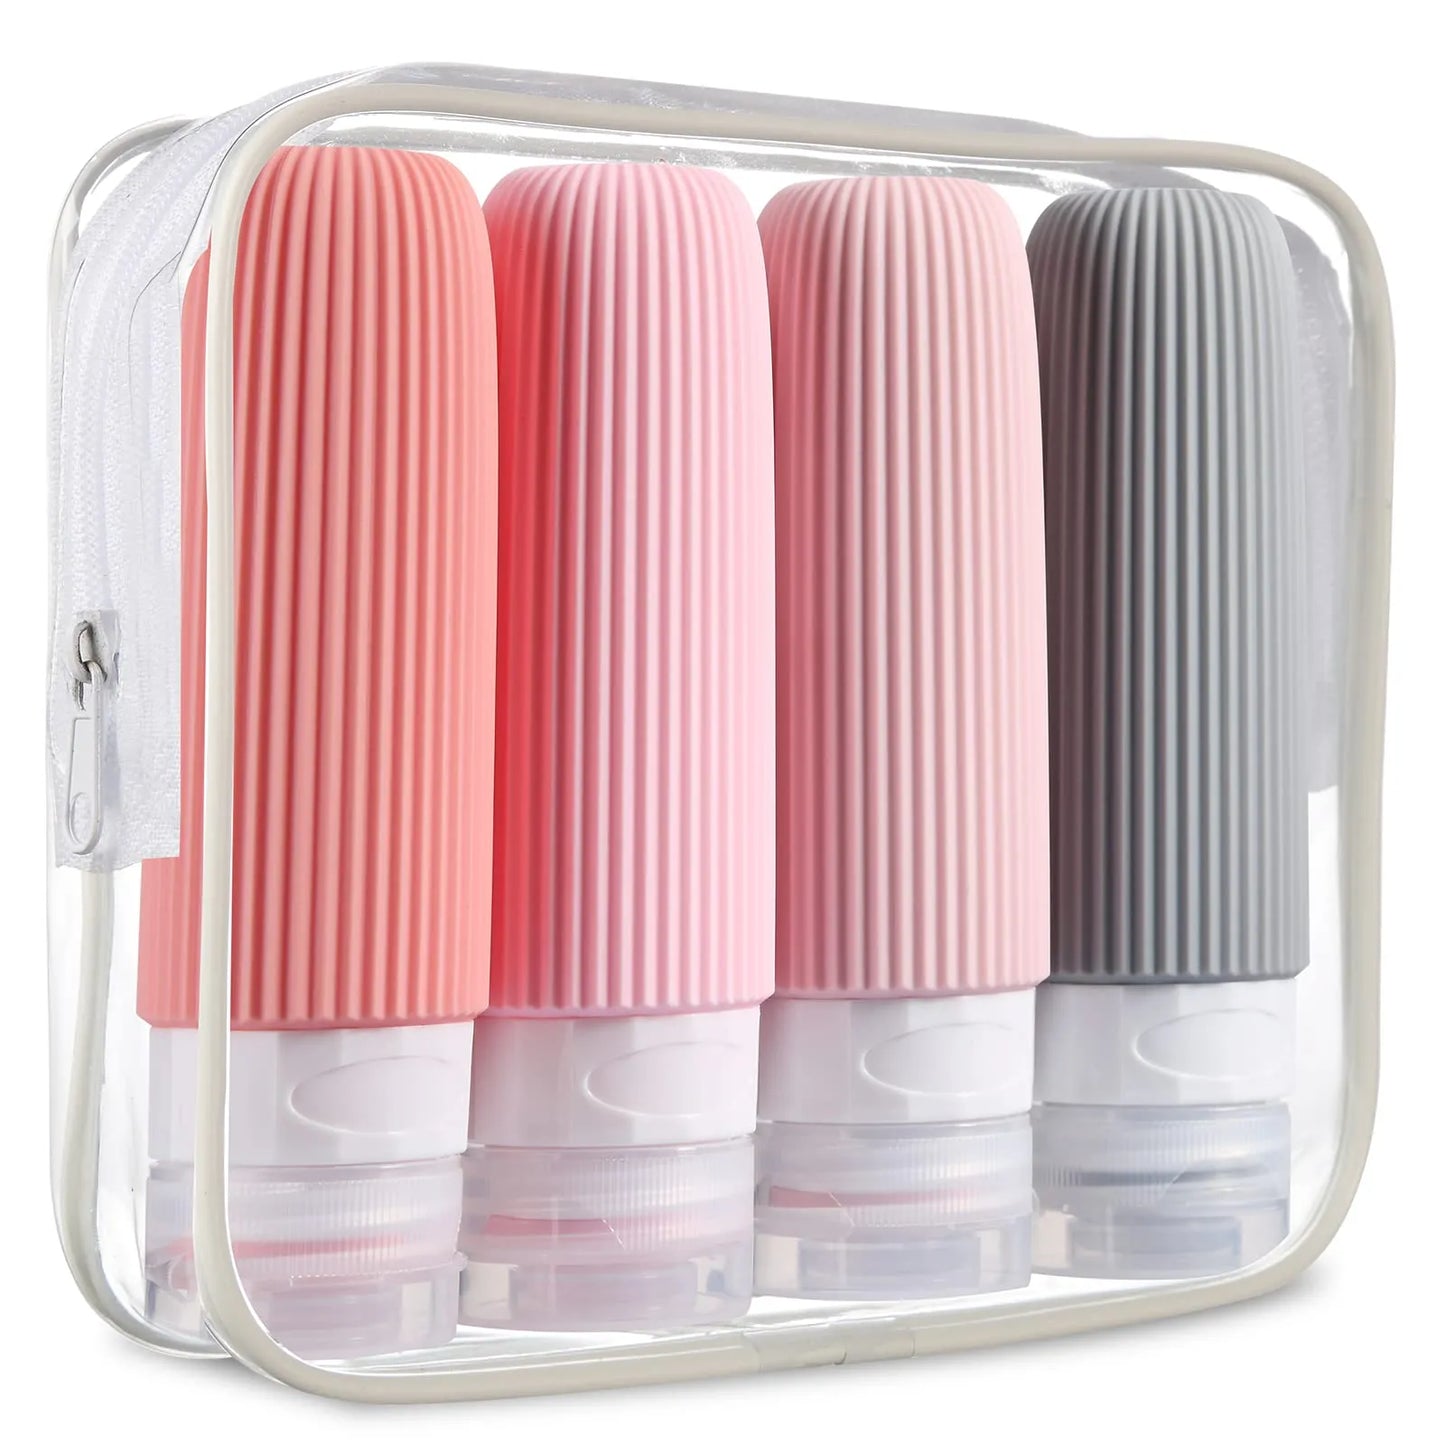 Silicone Travel Bottles Accessories Tsa Approved Portable BPA Free Leak Proof Squeezable Size Containers